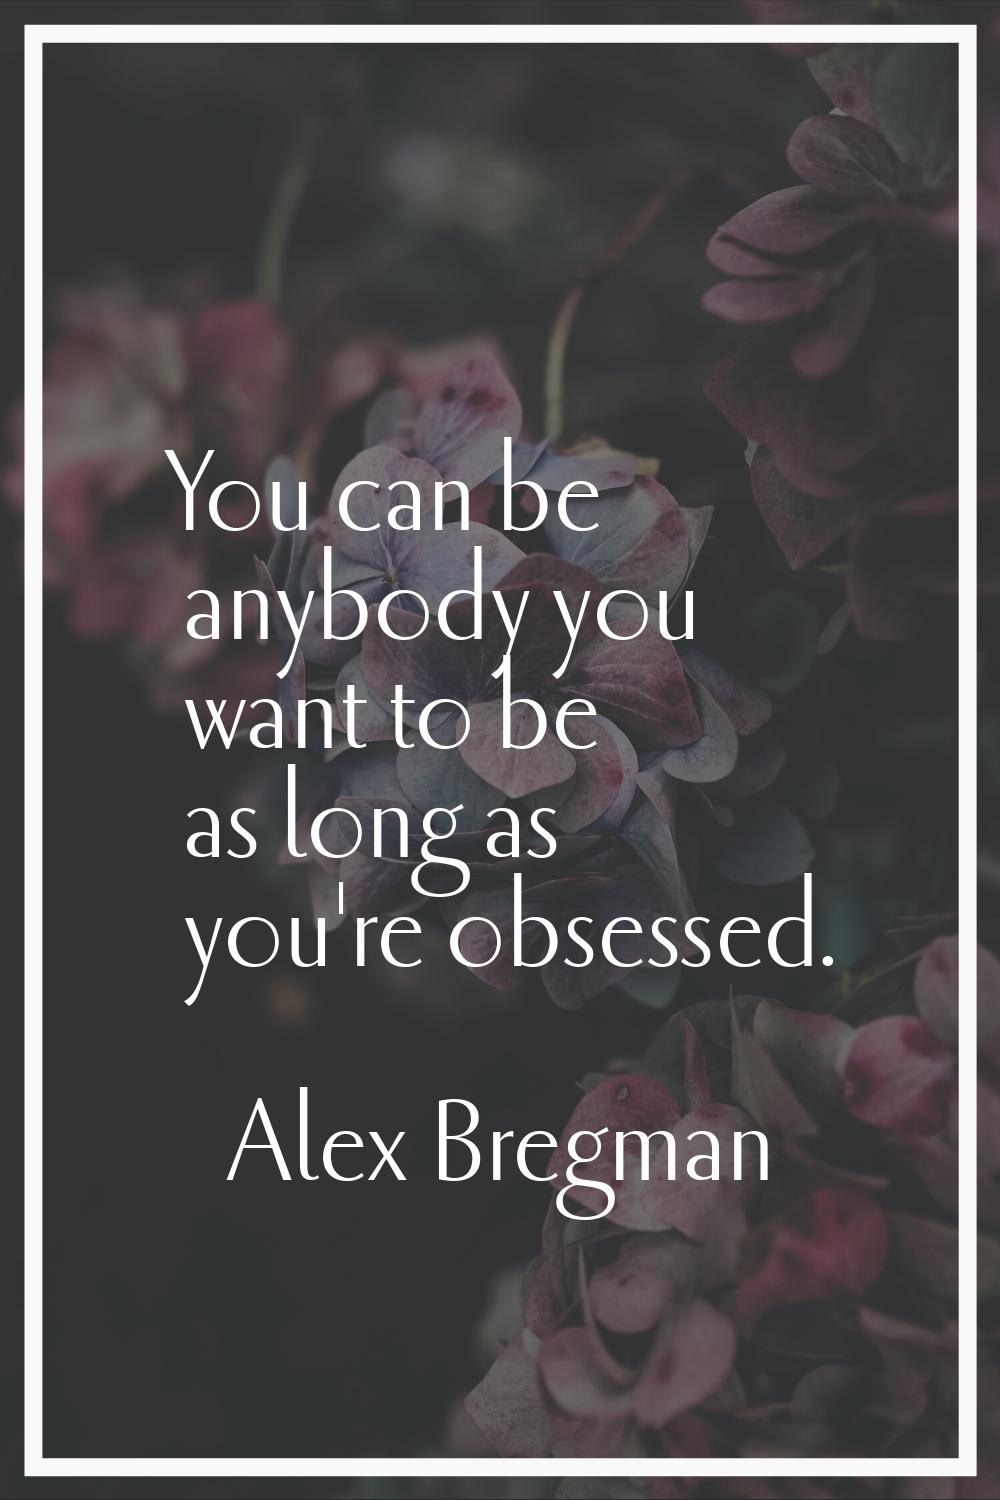 You can be anybody you want to be as long as you're obsessed.